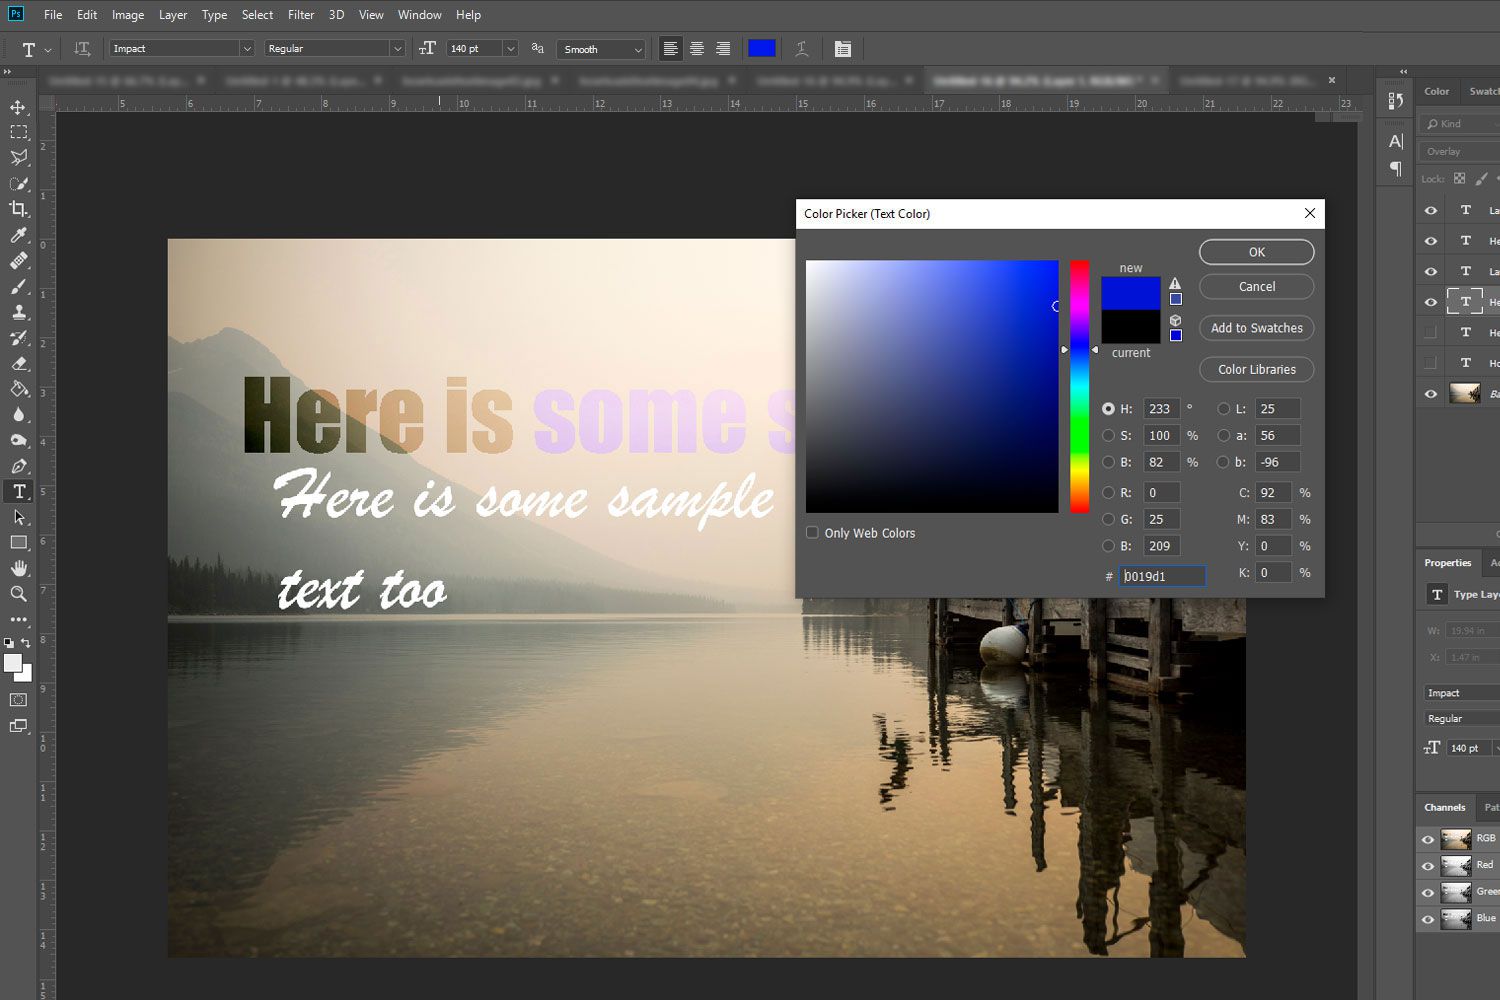 How To Put Text On An Image In Photoshop